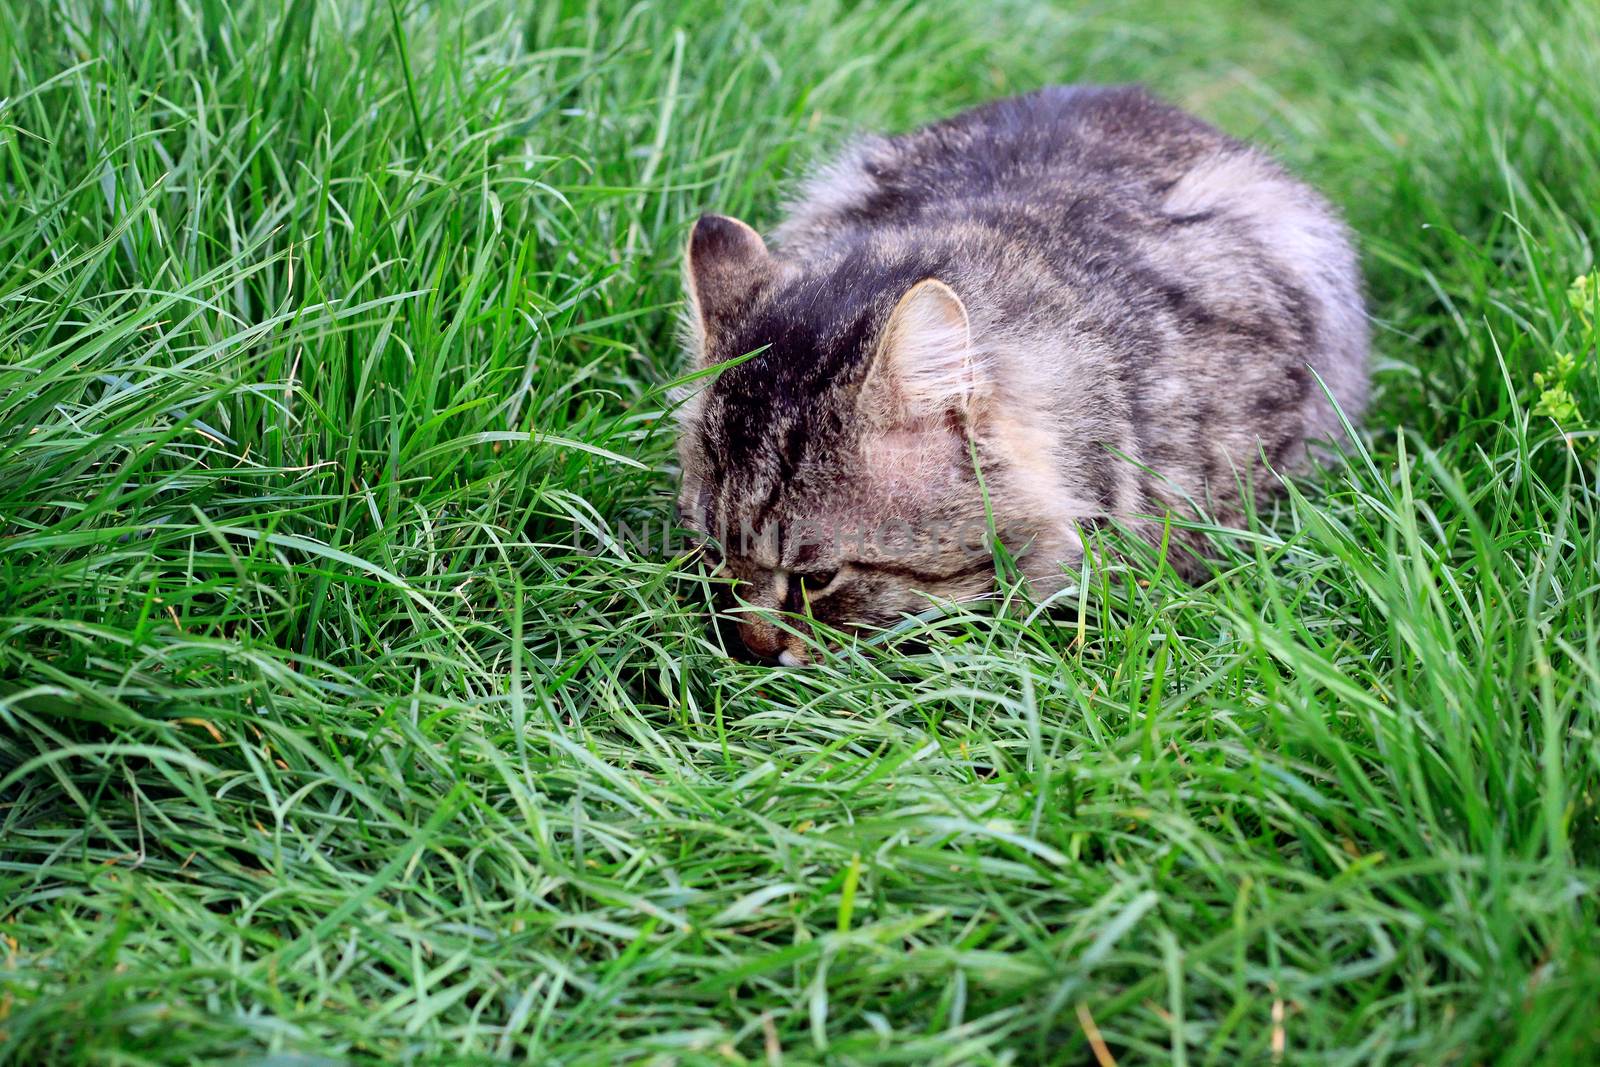 big striped cat or kitten in the grass. food. photo